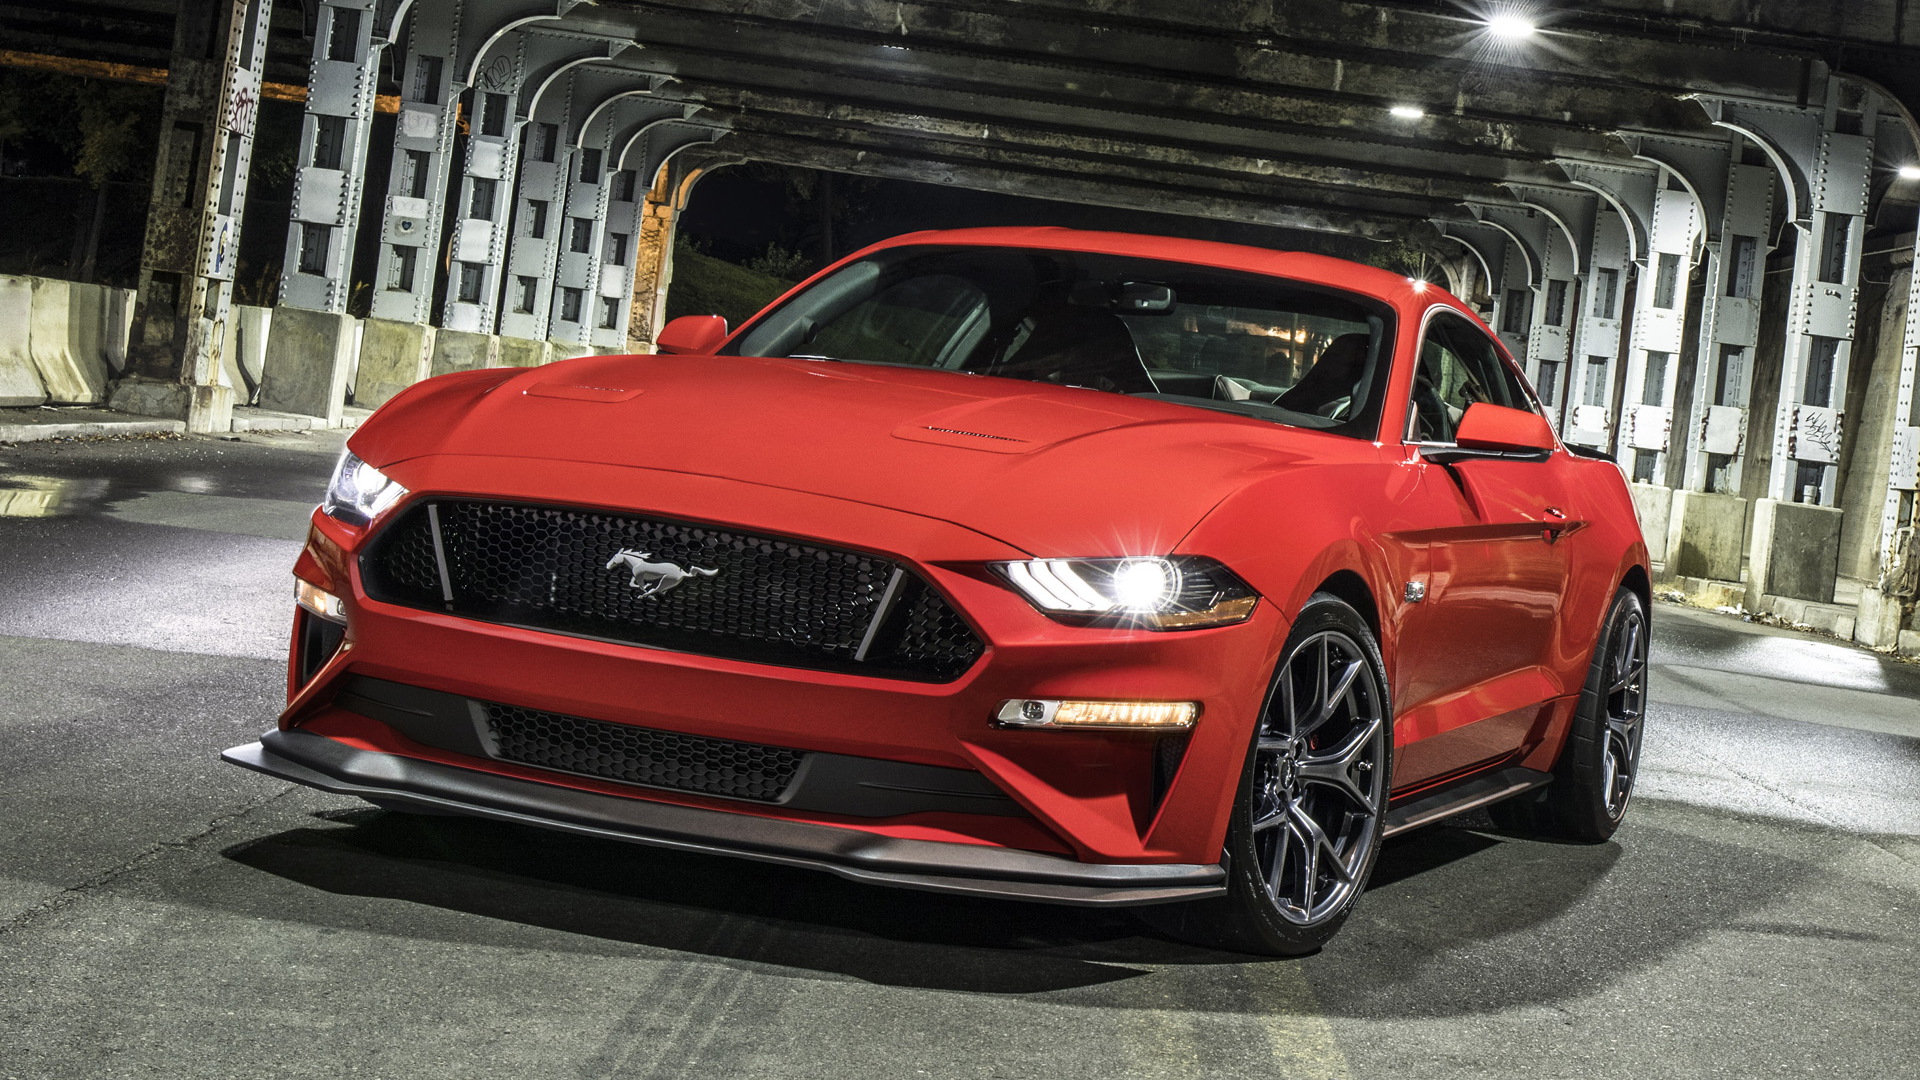 2018 Ford Mustang GT equipped with Performance Pack Level 2